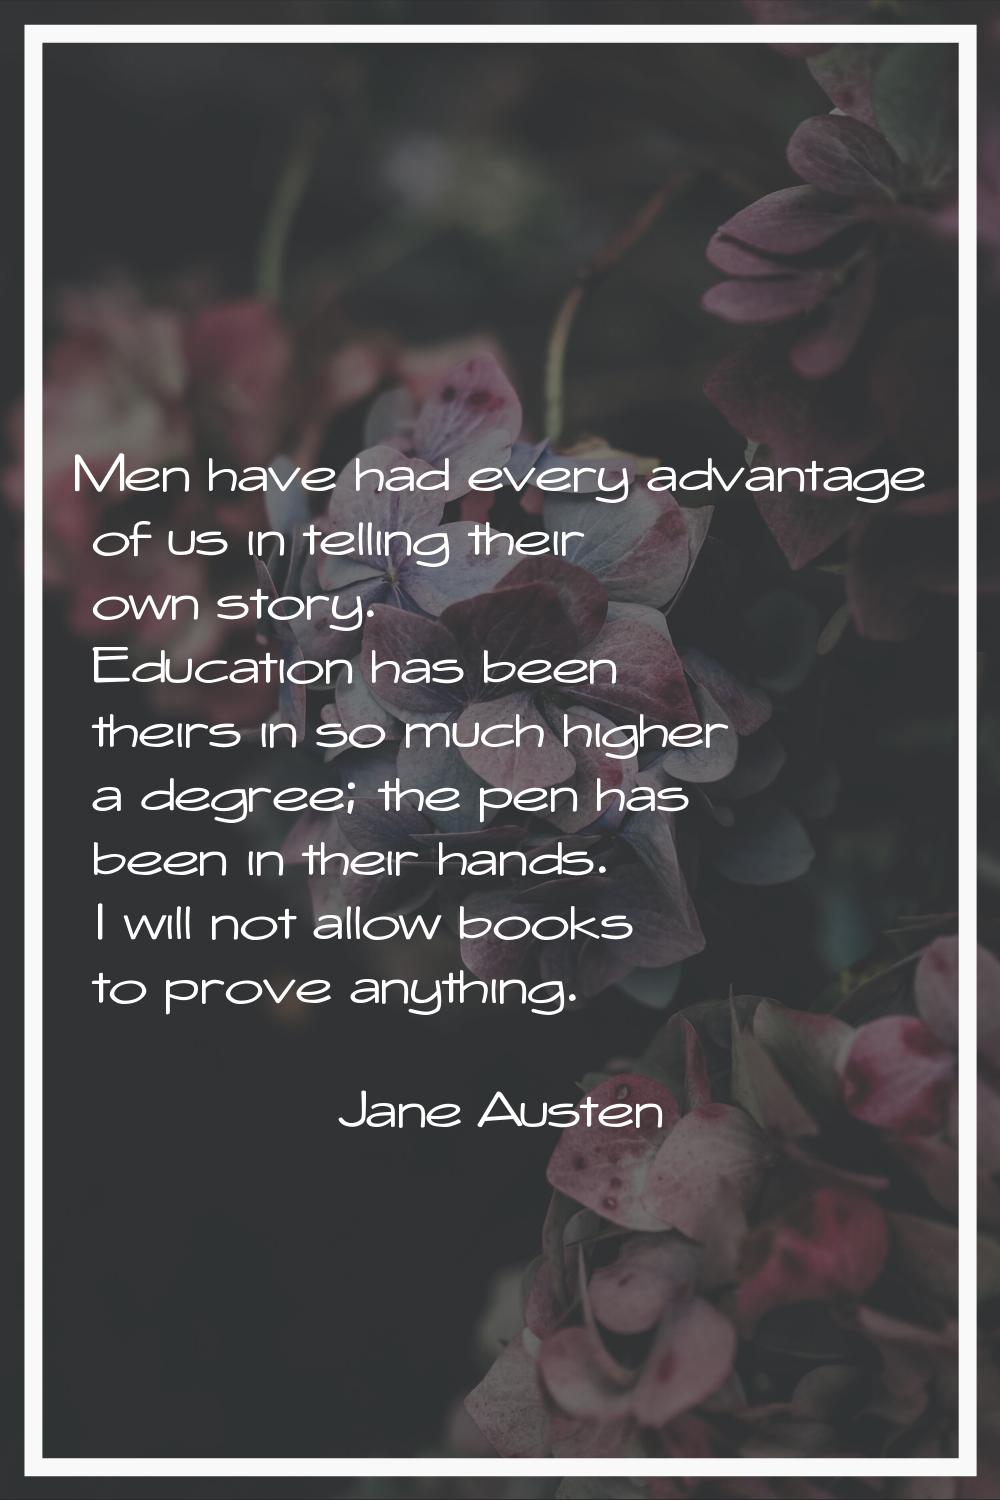 Men have had every advantage of us in telling their own story. Education has been theirs in so much